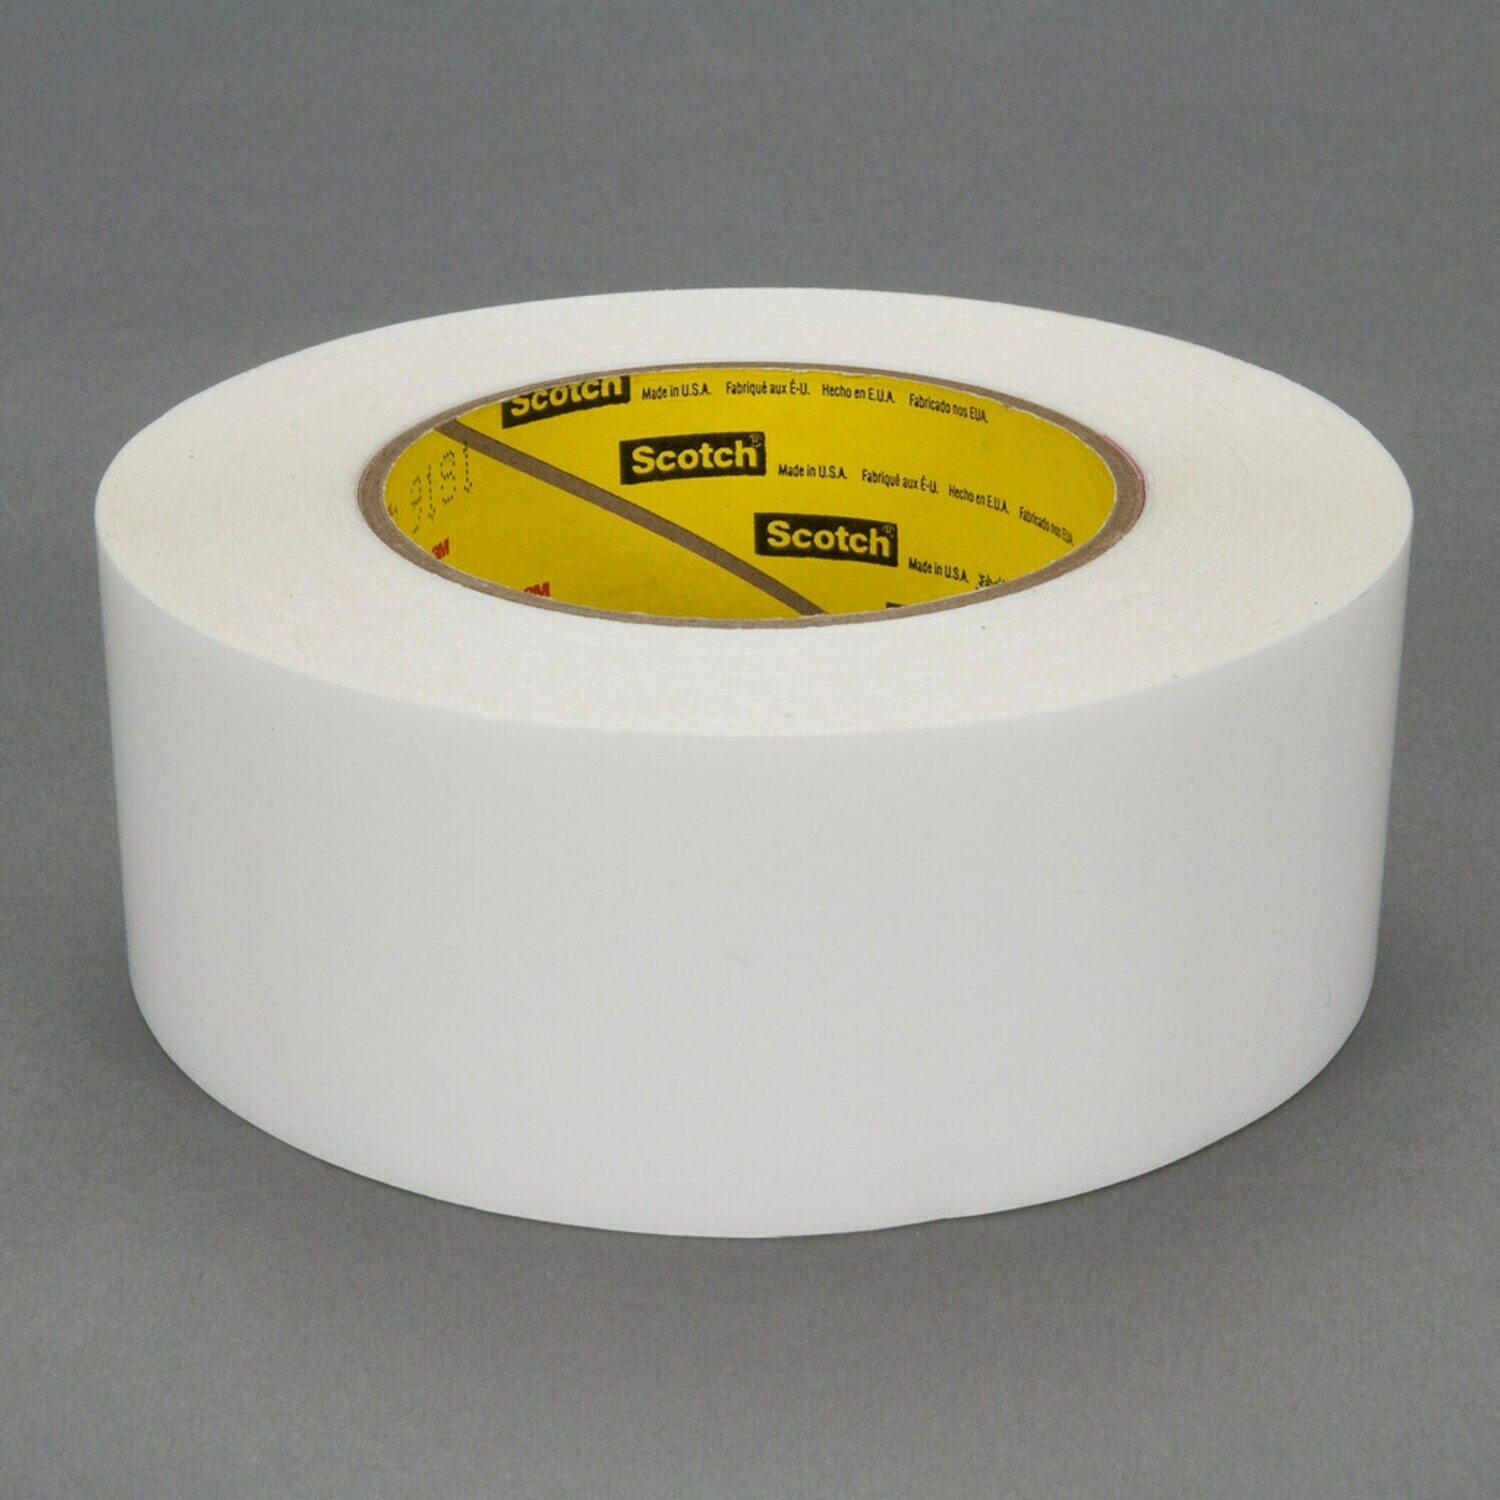 7010334791 - 3M Squeak Reduction Tape 5430, Transparent, 24 in x 36 yd, 7.4 mil, 1 Roll/Case